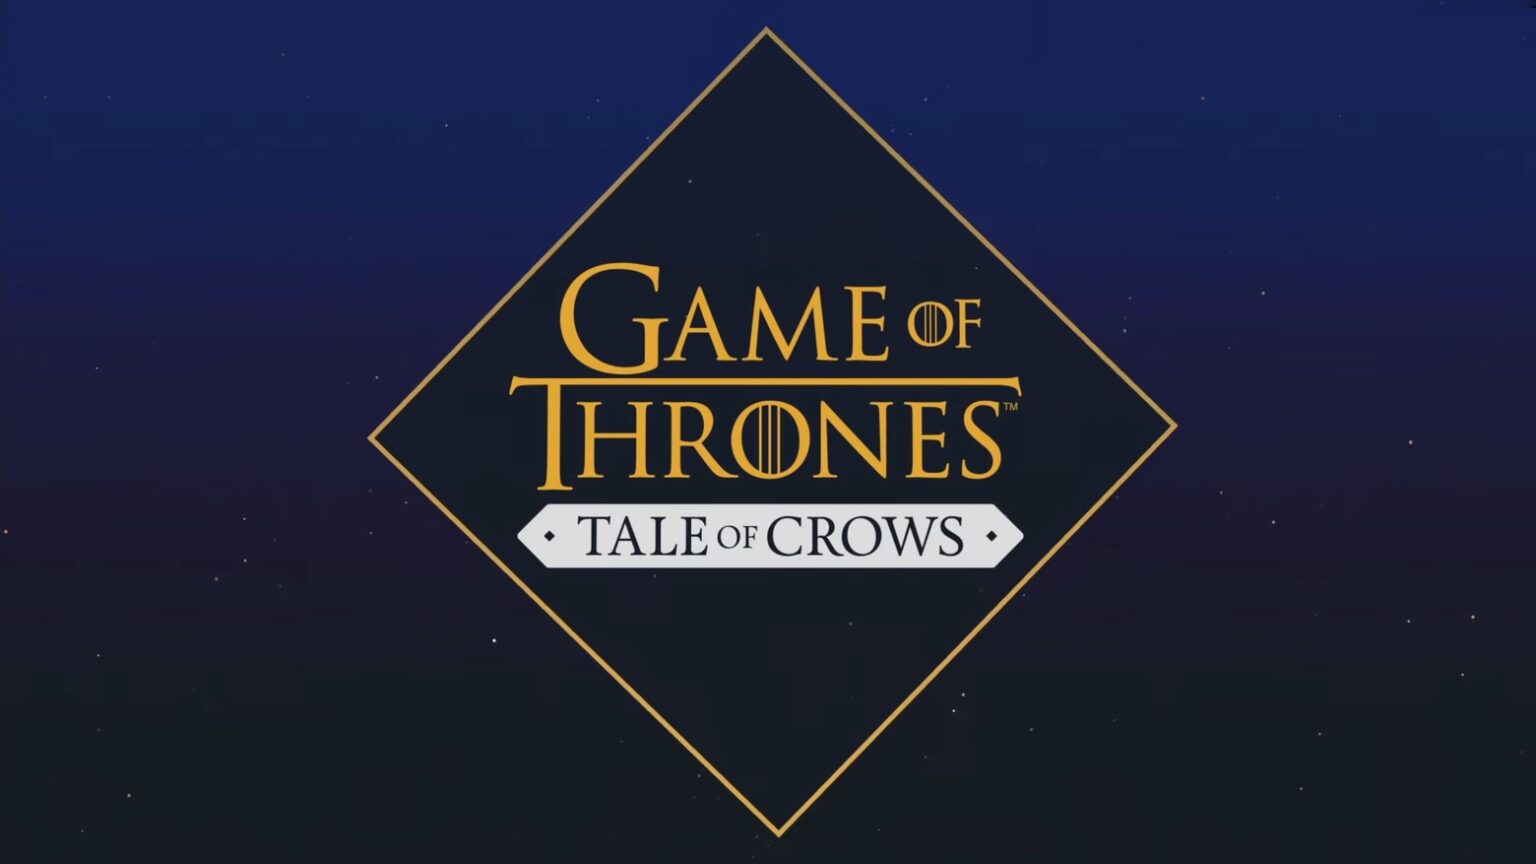 Try too pretend Season 8 didn’t happen in ‘Game of Thrones: Tale of Crows’